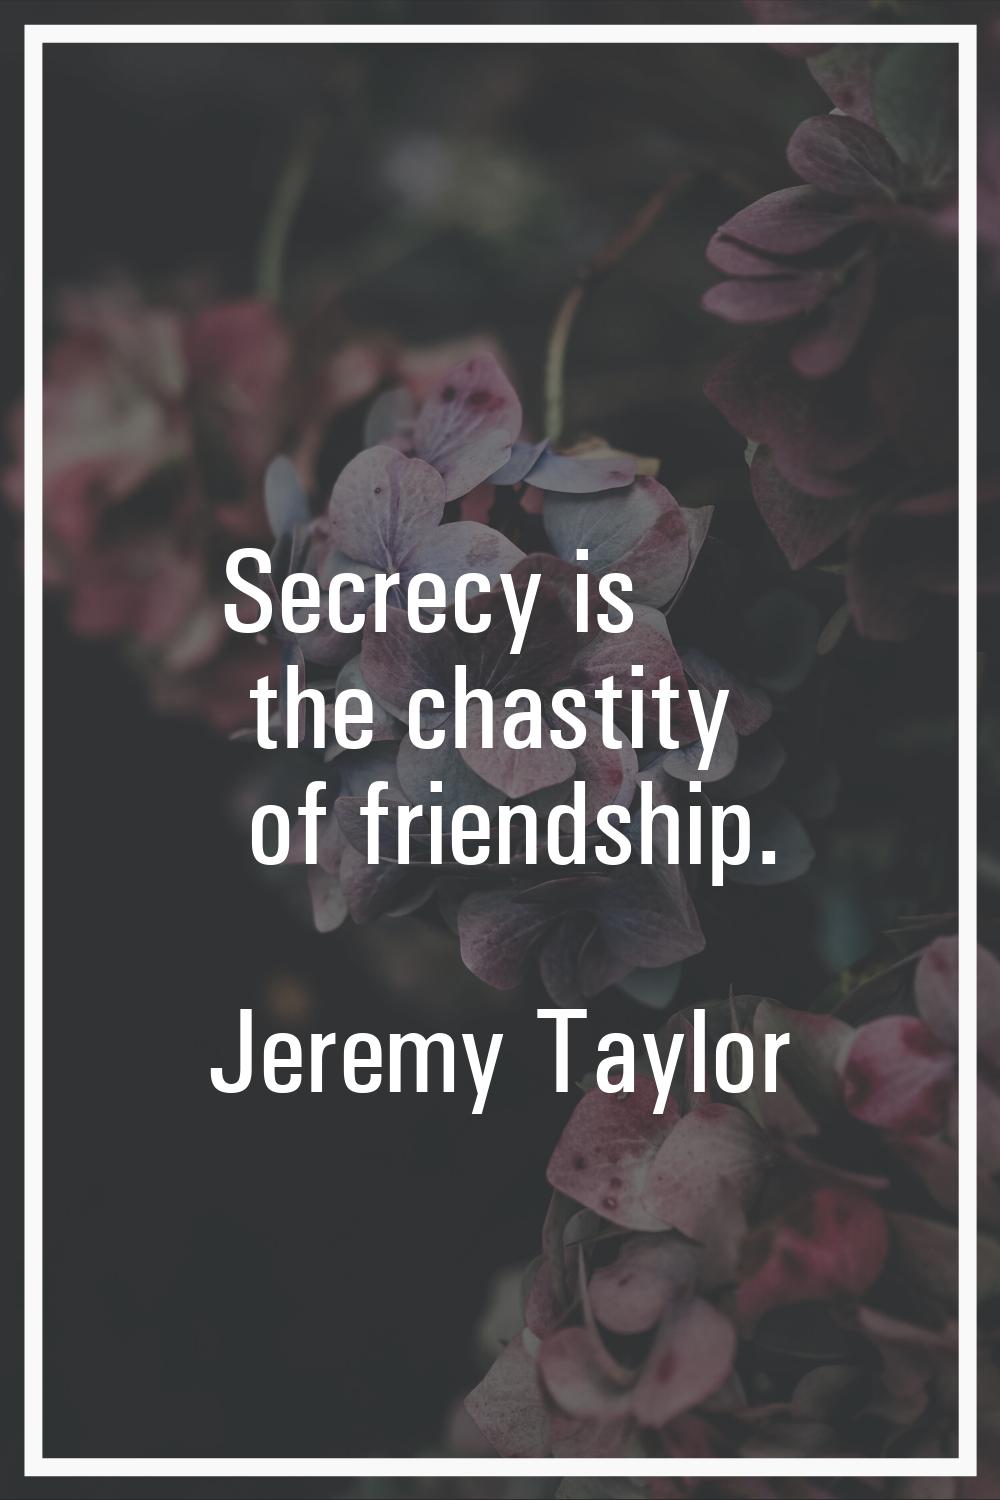 Secrecy is the chastity of friendship.